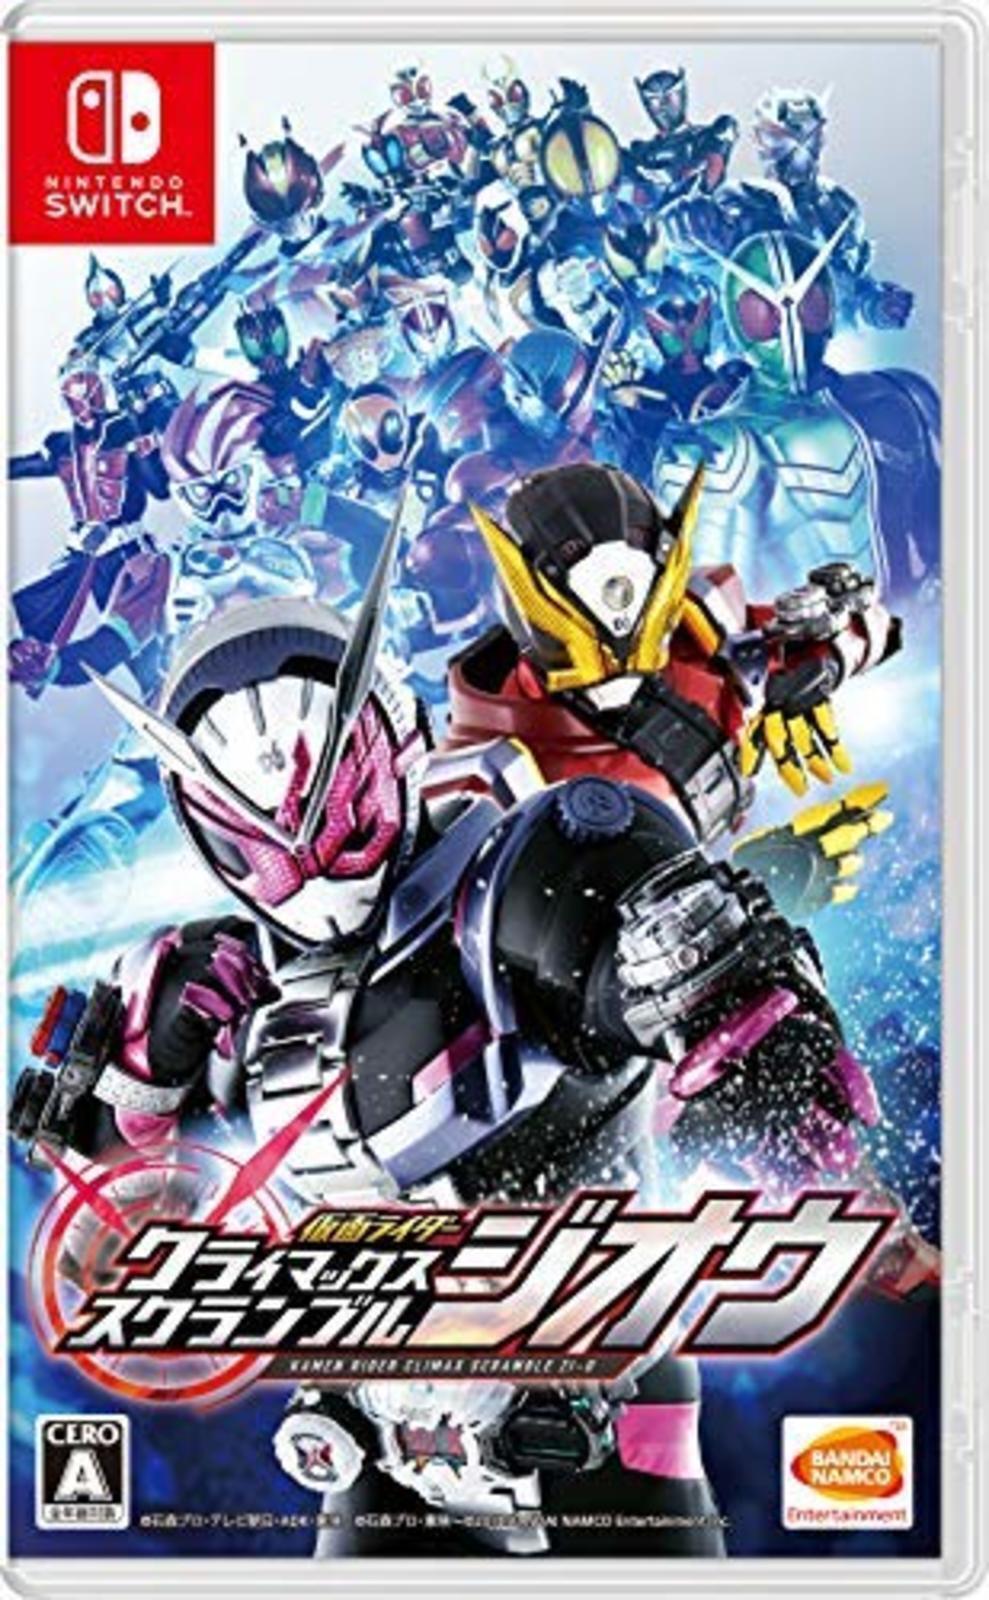 Adorable Nintendo Switch Rider Climax scramble ZI-O Free Ship w/Tracking# New from Japan on eBay